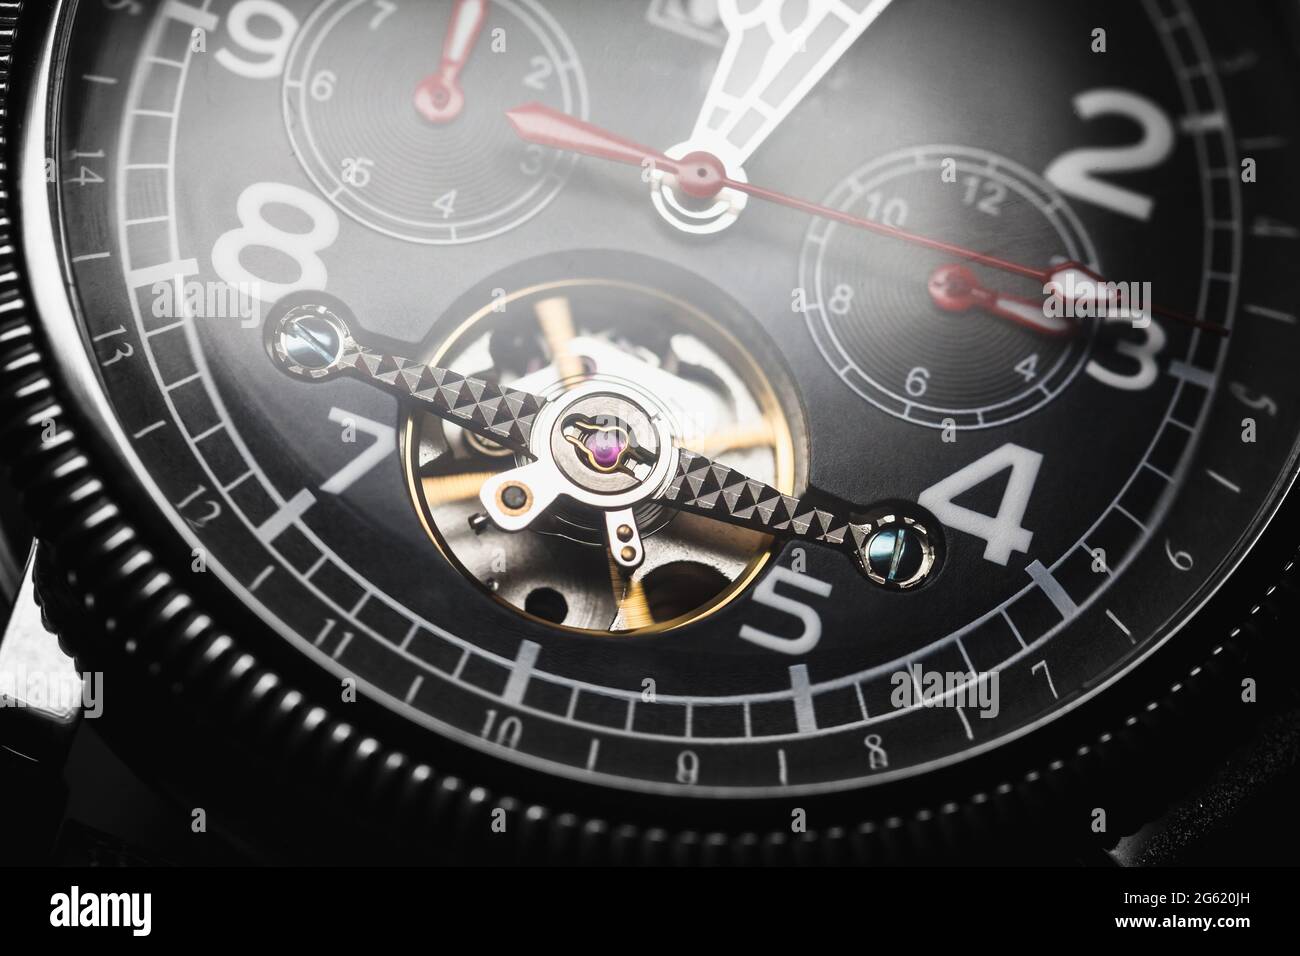 Automatic mechanical wrist watch with black clock face and red arrows, close-up fragment Stock Photo